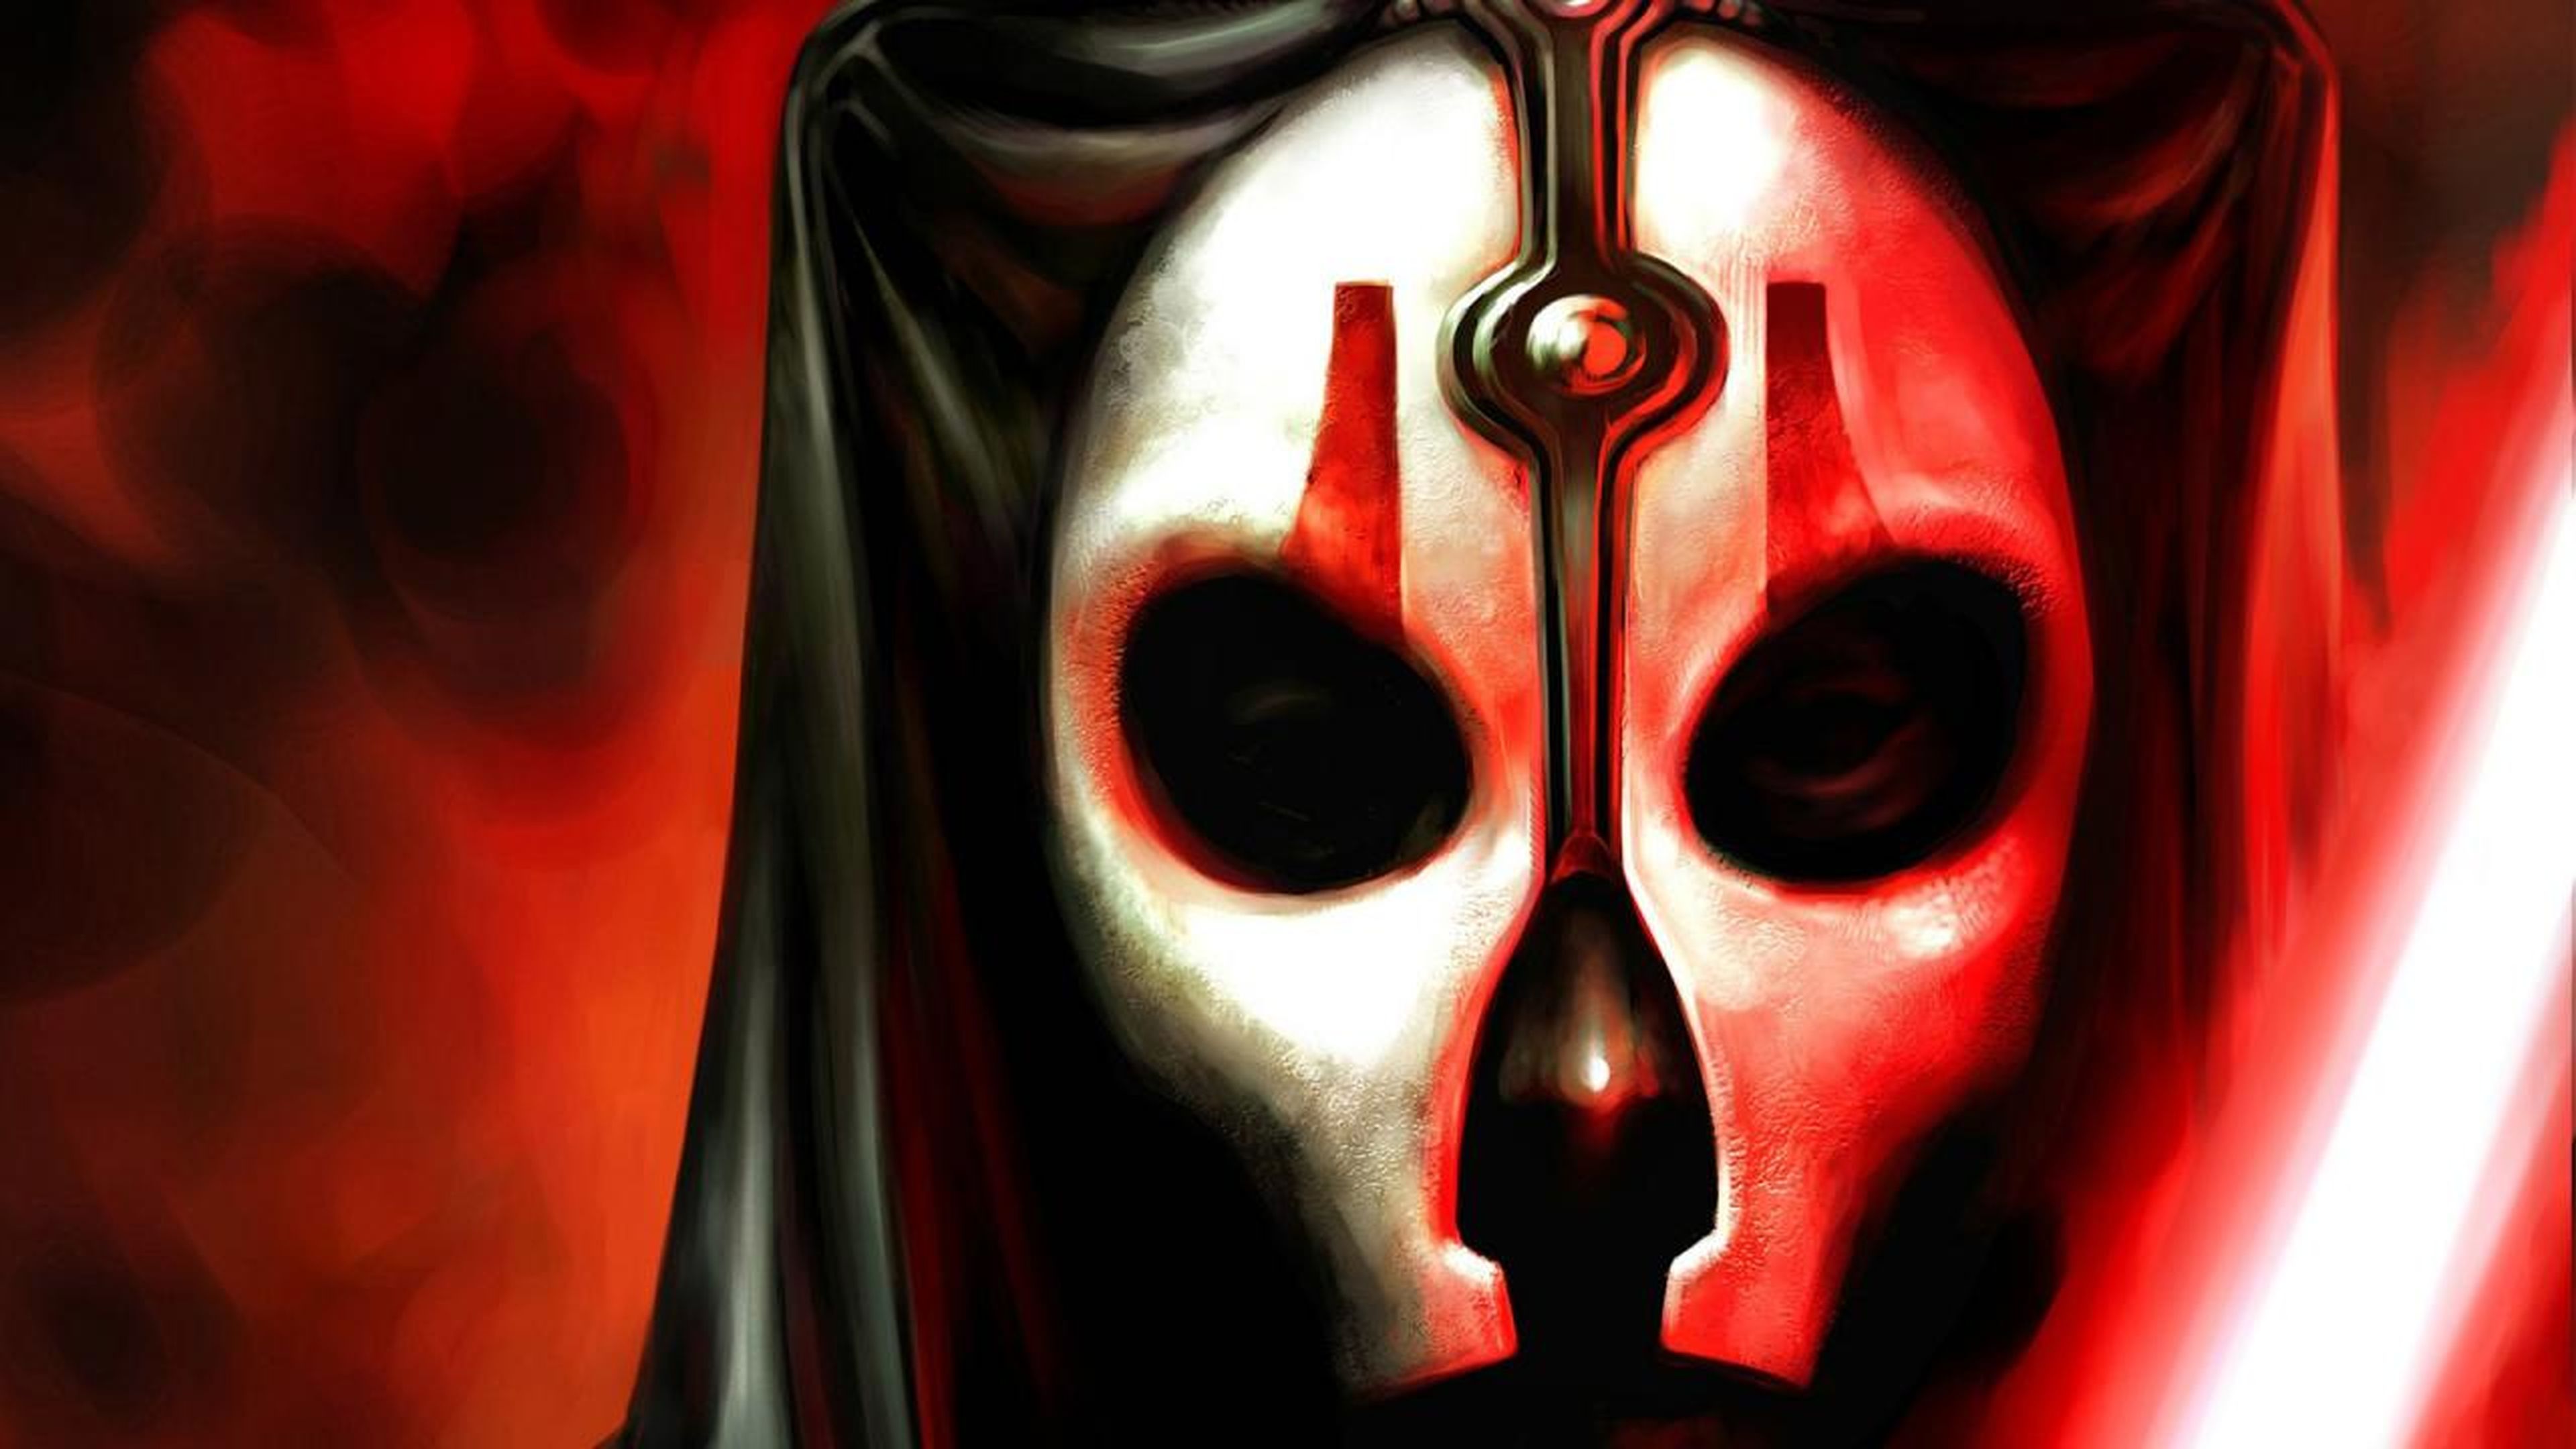 Lack of Ideas Forces Original Star Wars KOTOR Designer to Rule Out Third Installment